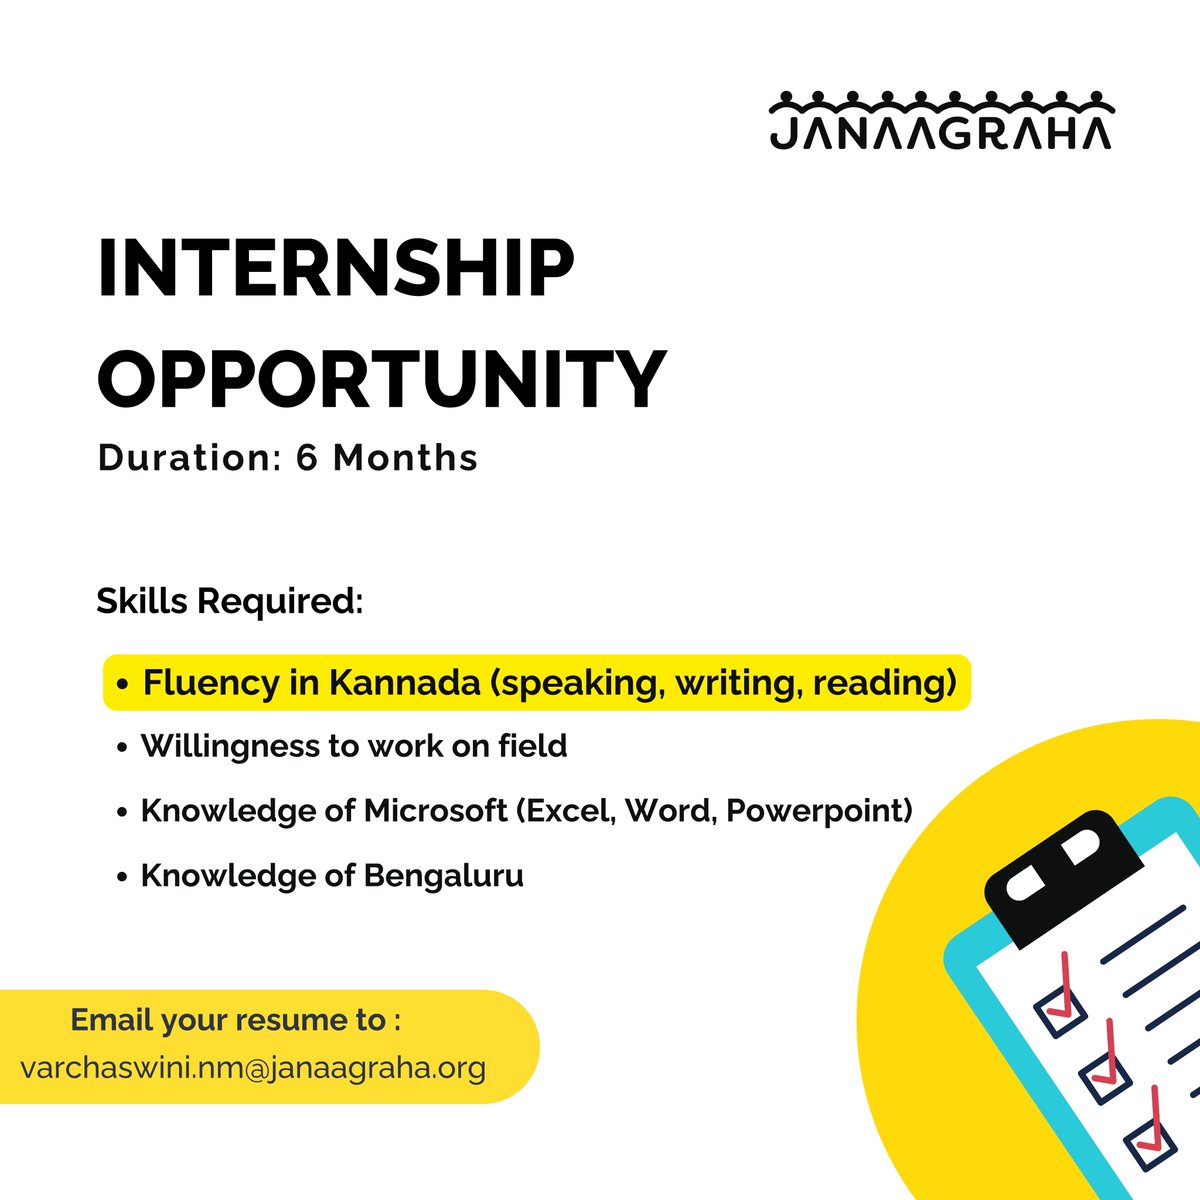 #InternshipOpportunity Are you interested in #CivicParticipation, #UrbanGovernance, and enhancing the quality of life in Indian cities? We have an opportunity in #Bengaluru that might be of interest to you! Please send your #resume to: varchaswini.nm@janaagraha.org